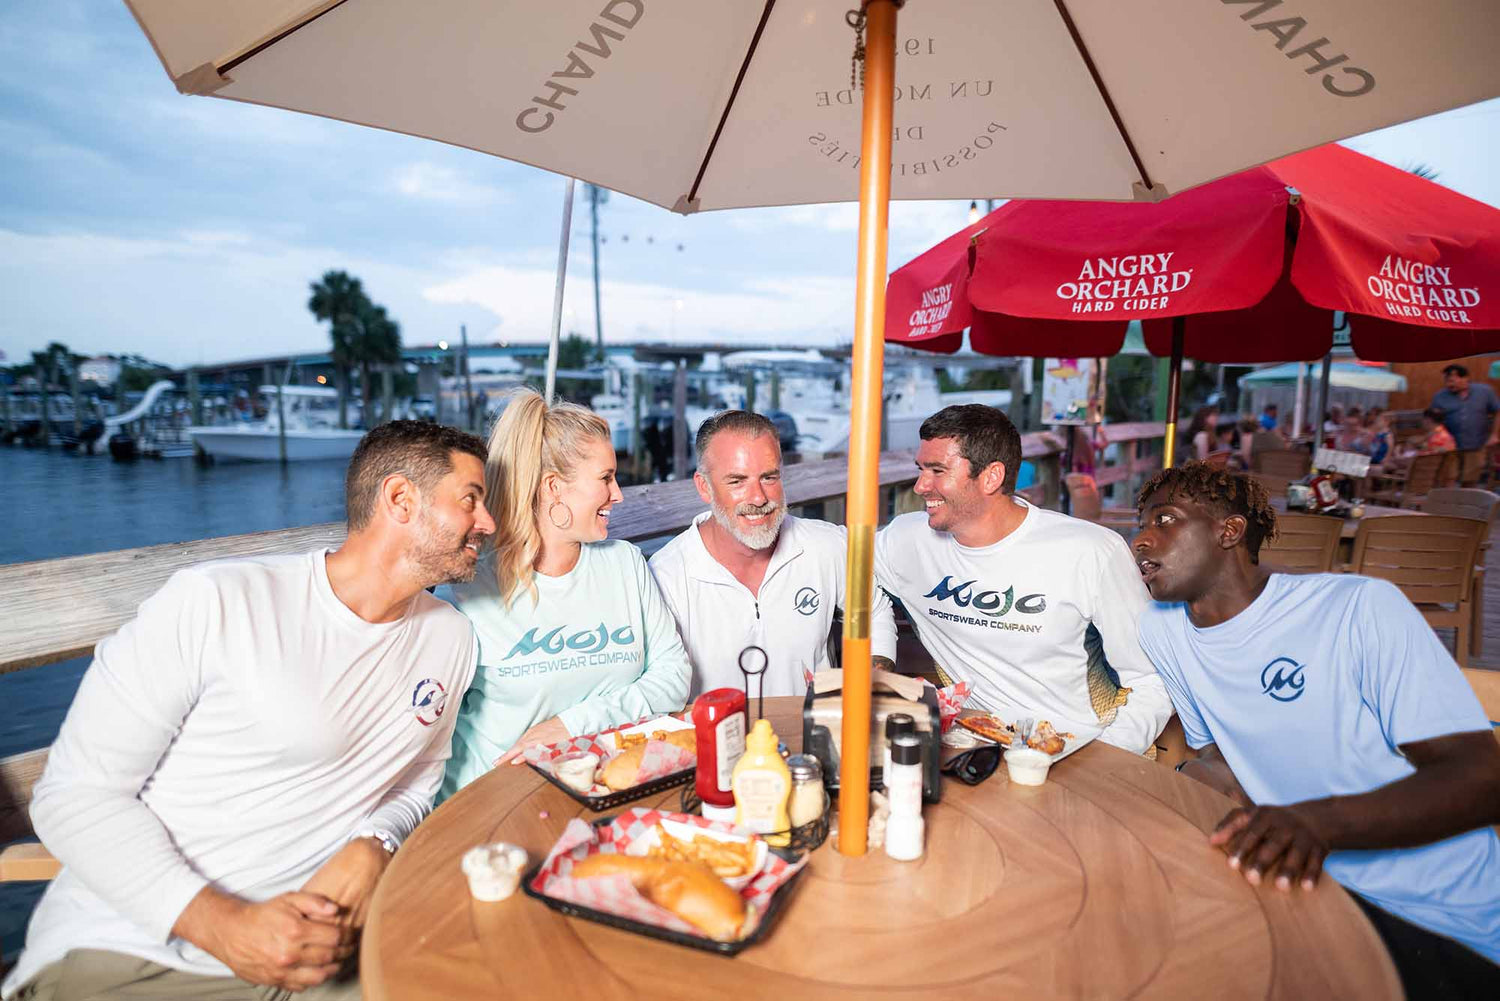 Group of 4 men and 1 woman wearing MSC performance gear and sitting around an outdoor table with food. In the background is a harbor with boats docked in the water